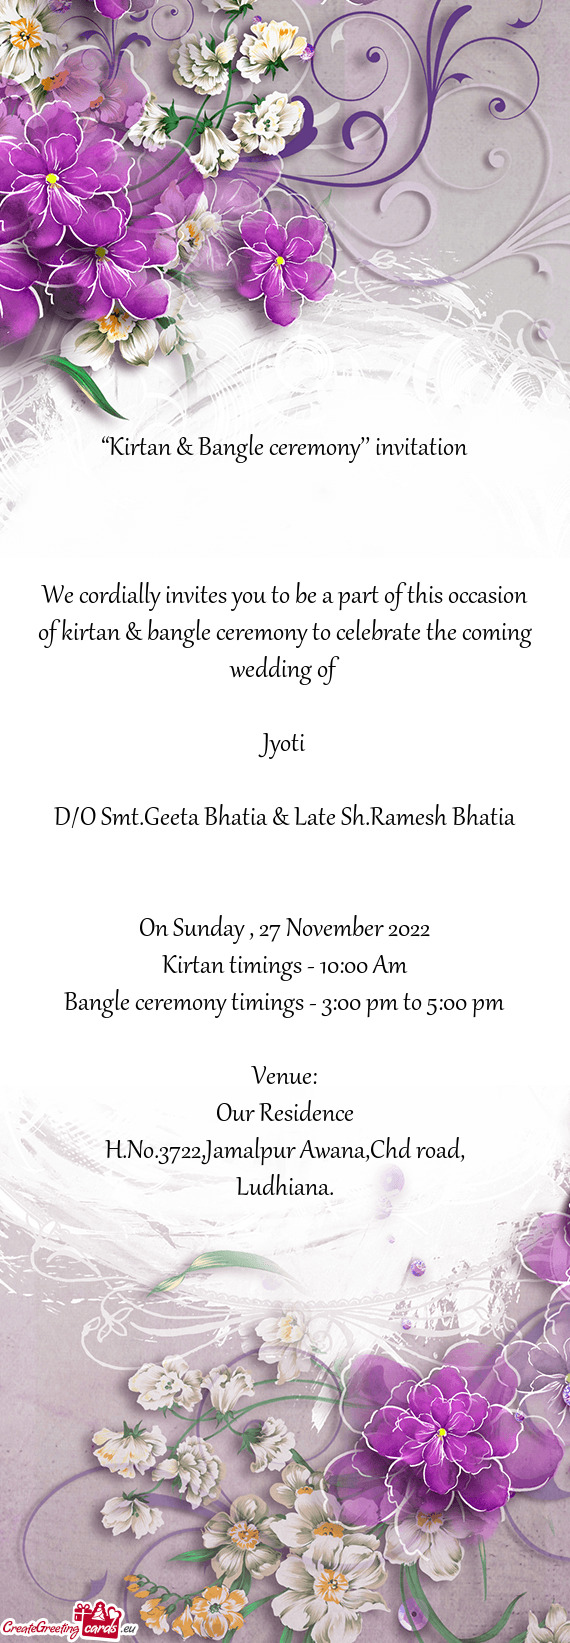 We cordially invites you to be a part of this occasion of kirtan & bangle ceremony to celebrate the